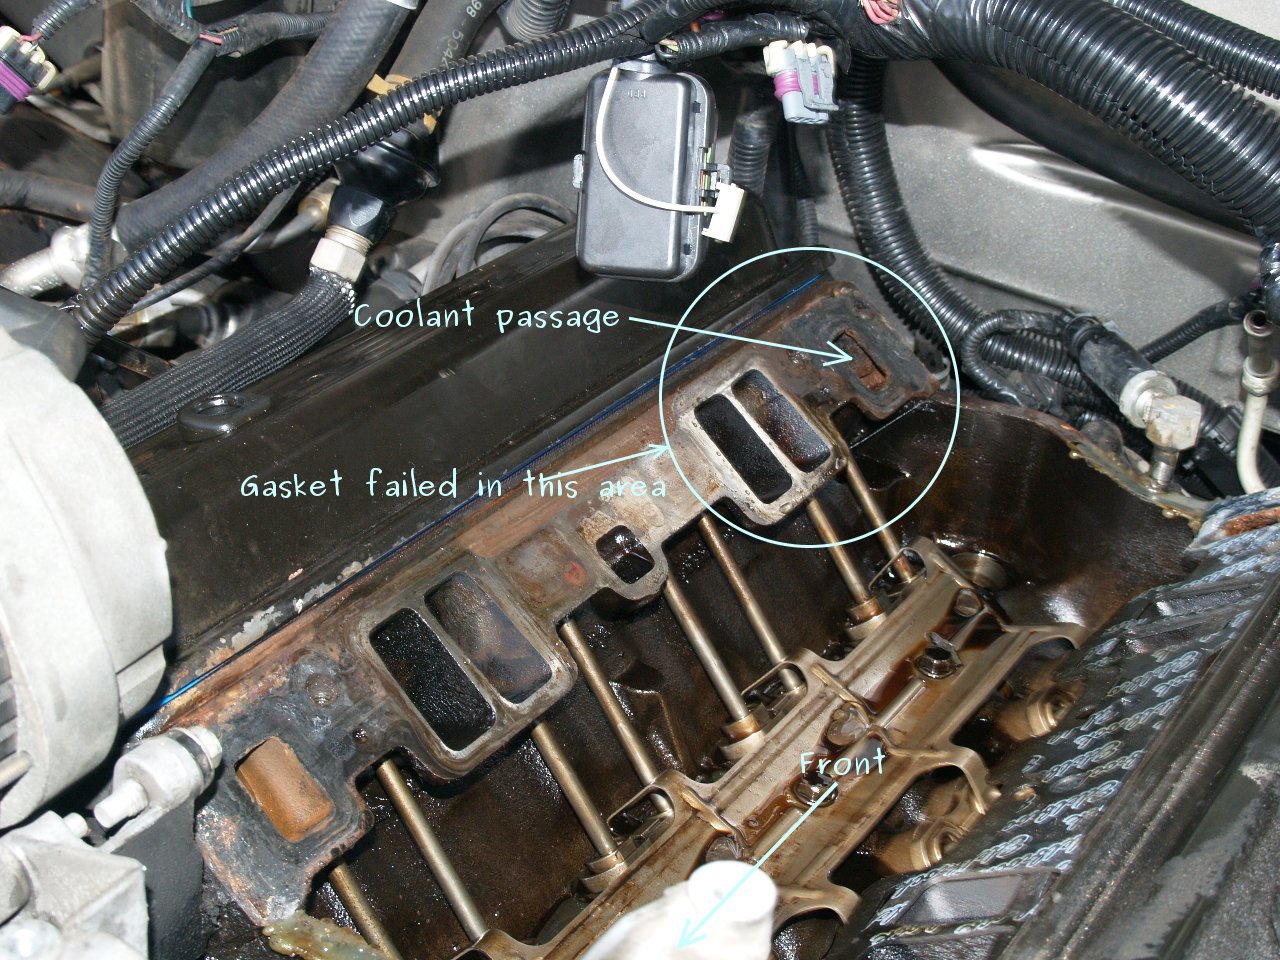 See C3071 in engine